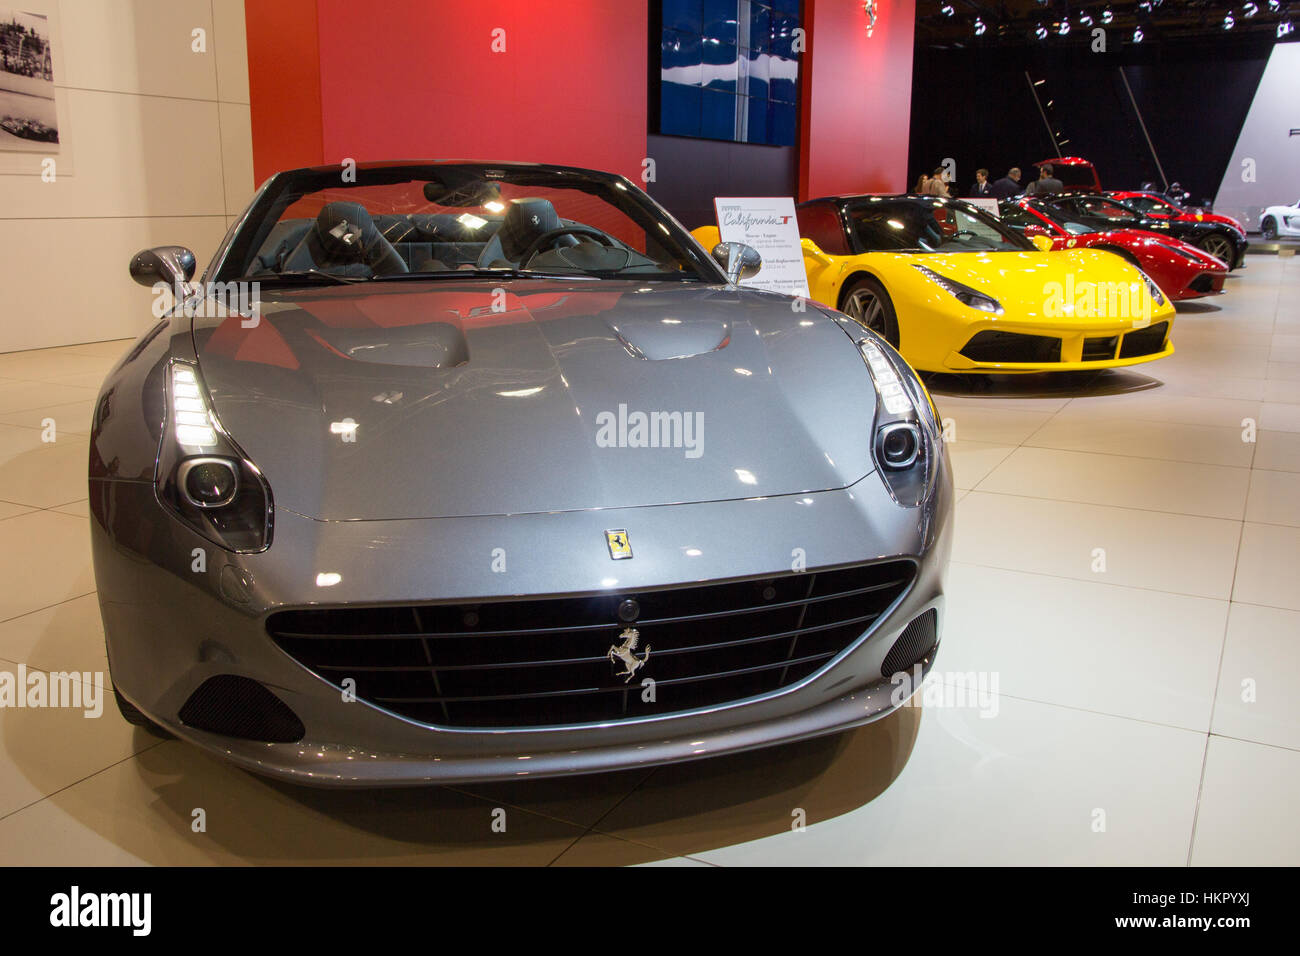 BRUSSELS - JAN 12, 2016: Ferrari California T sports car on display at the Brussels Motor Show. Stock Photo